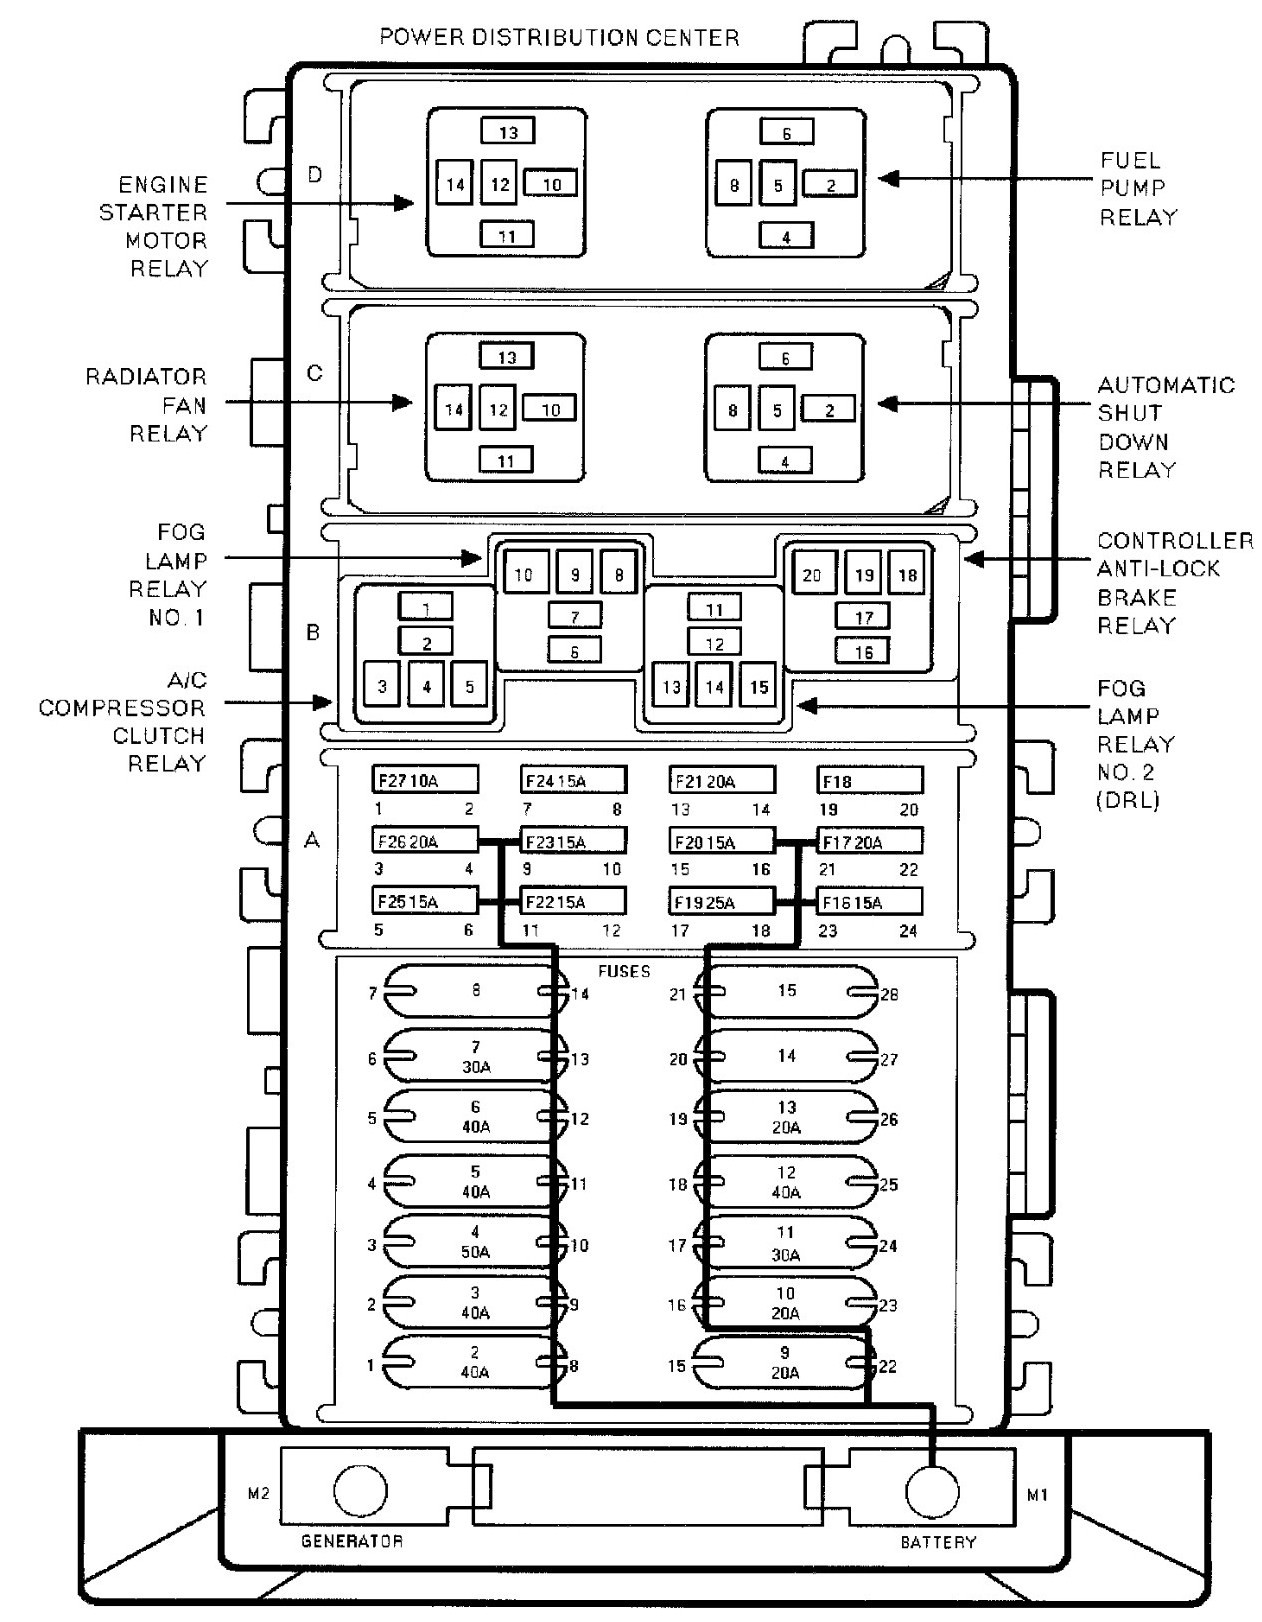 Fuse Diagram for 2001 ford F150 4.2 Liter Diagram] 1997 Jeep Cherokee Sport Fuse Diagram Full Version Of Fuse Diagram for 2001 ford F150 4.2 Liter